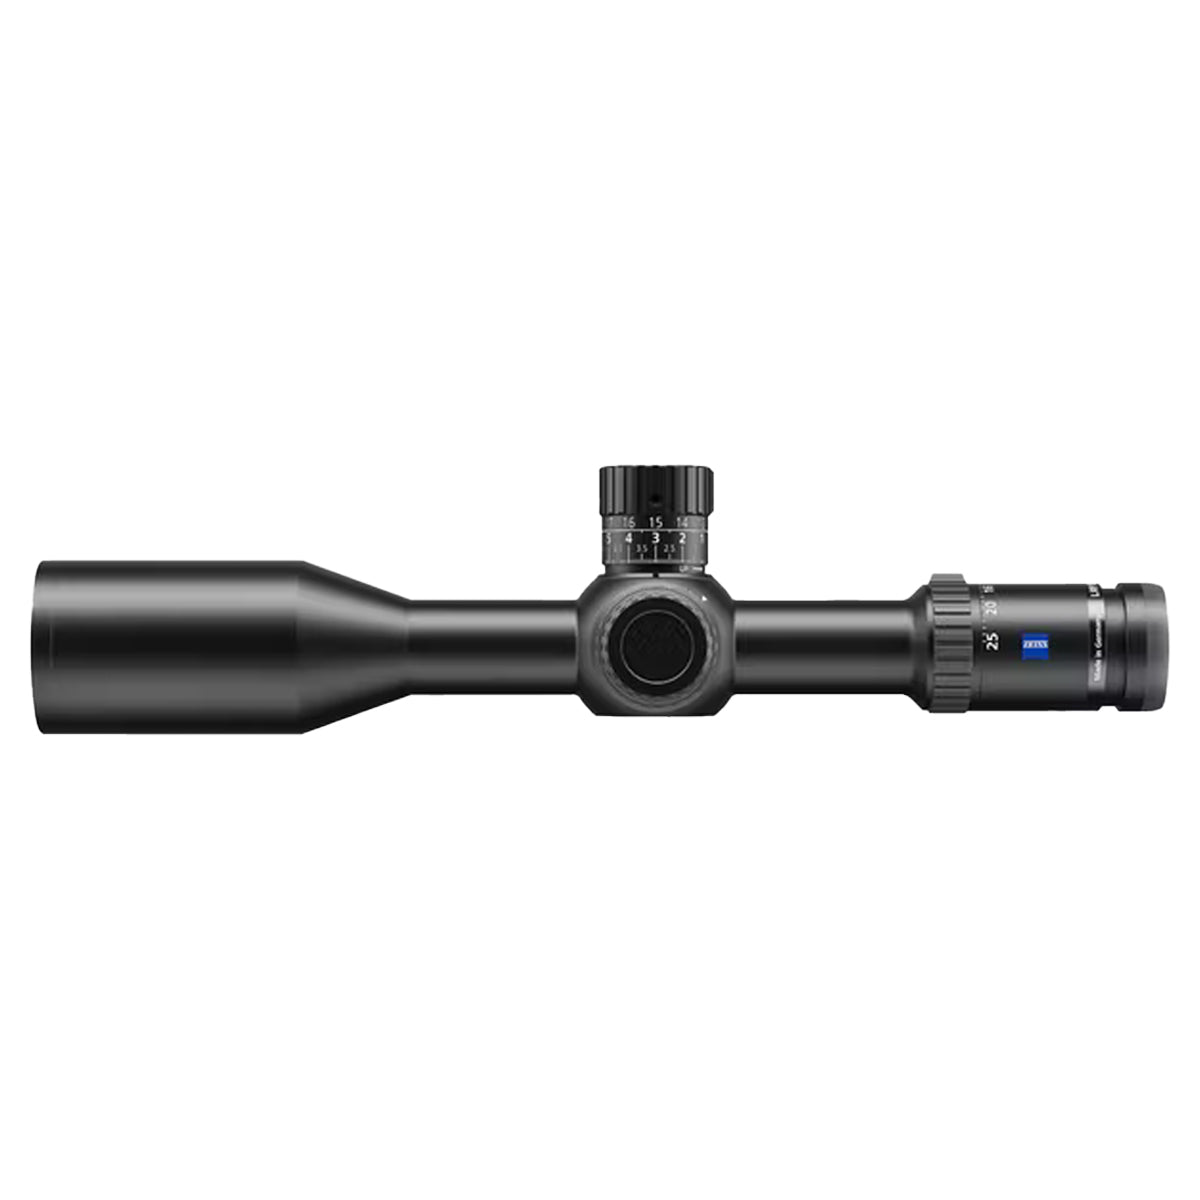 Zeiss LRP S5 5-25x56 ZF-MRI Reticle #16 in  by GOHUNT | Zeiss - GOHUNT Shop